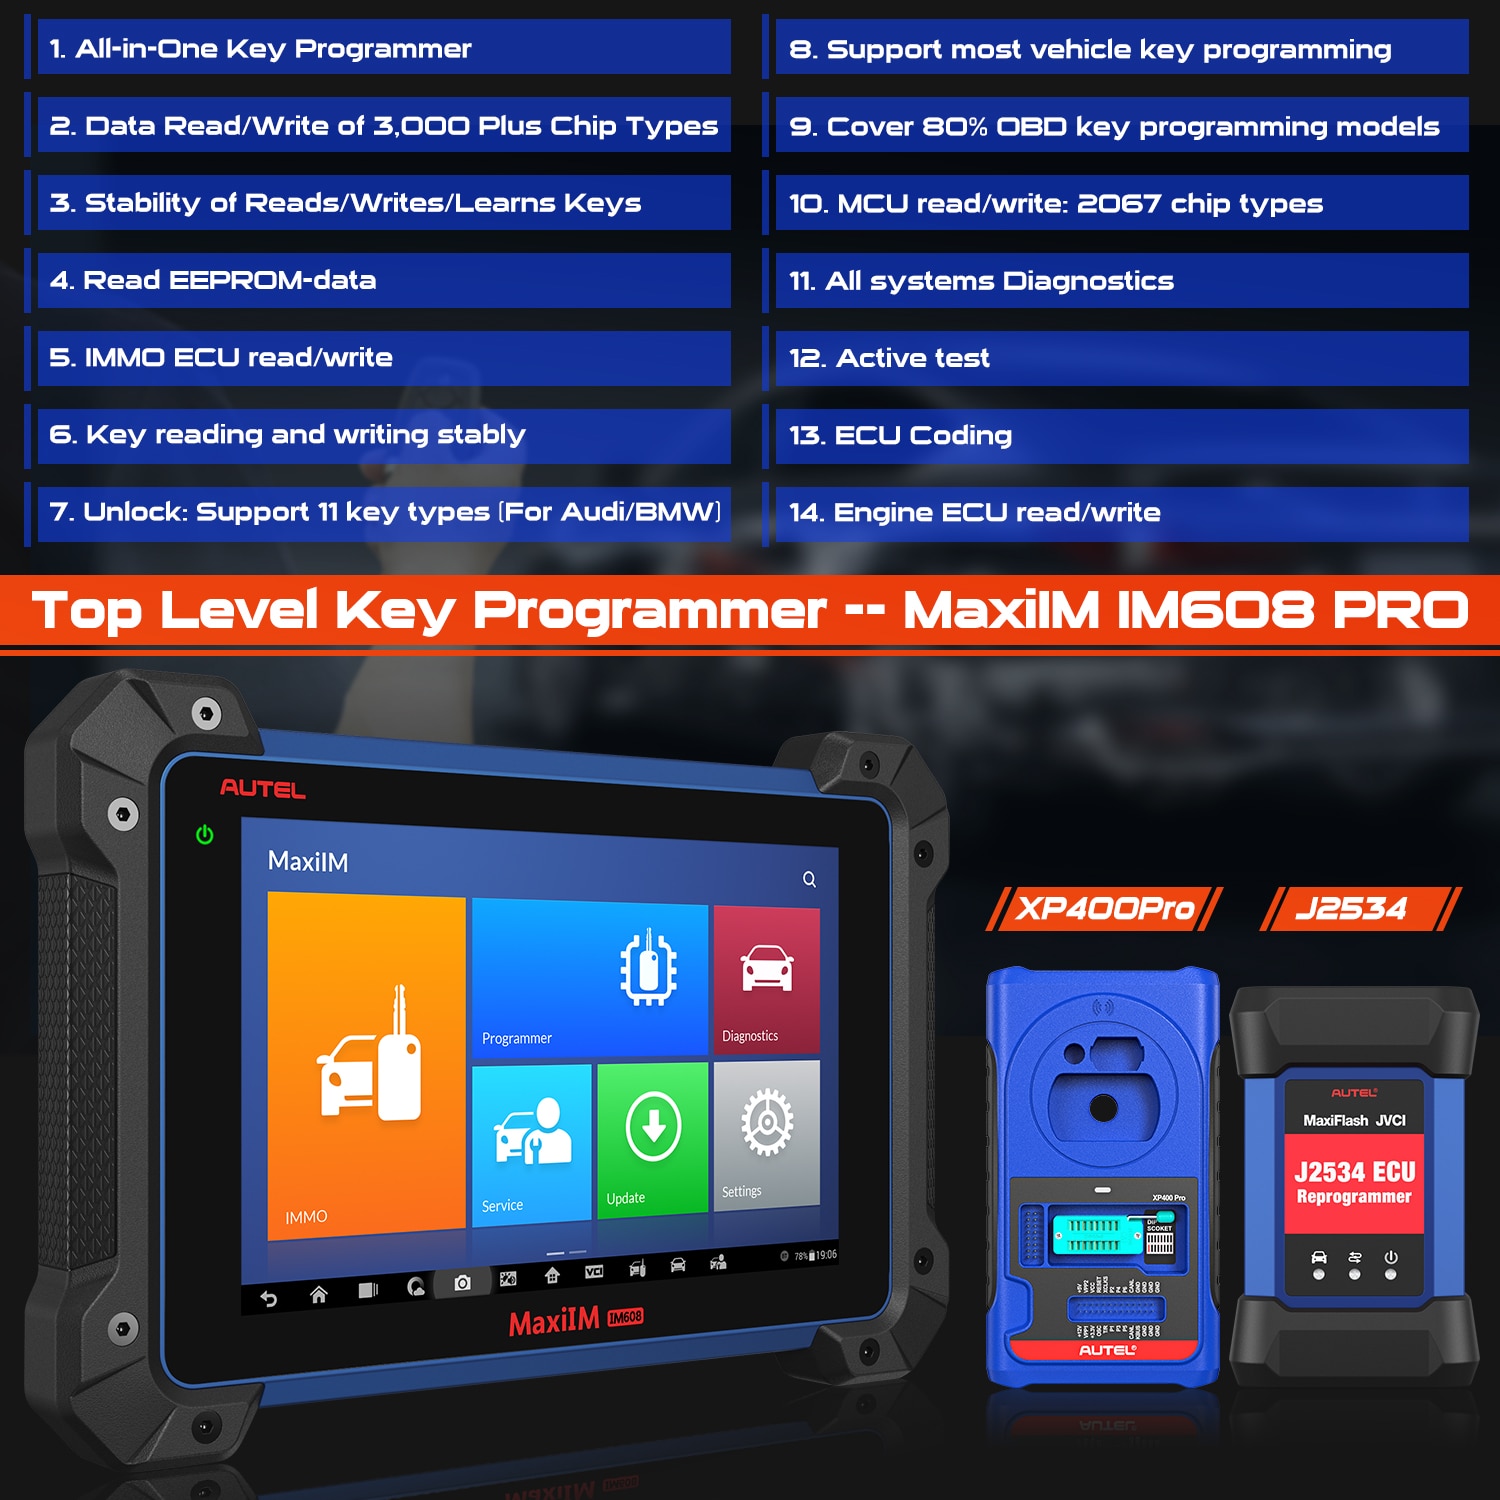 Autel-MaxiIM-IM608-Pro-with-IMMO-XP400-Pro-Key-Programming-Tool-J2534-Reprogrammer-30-Services-Functions-All-Systems-Diagnosis-1005002666543661